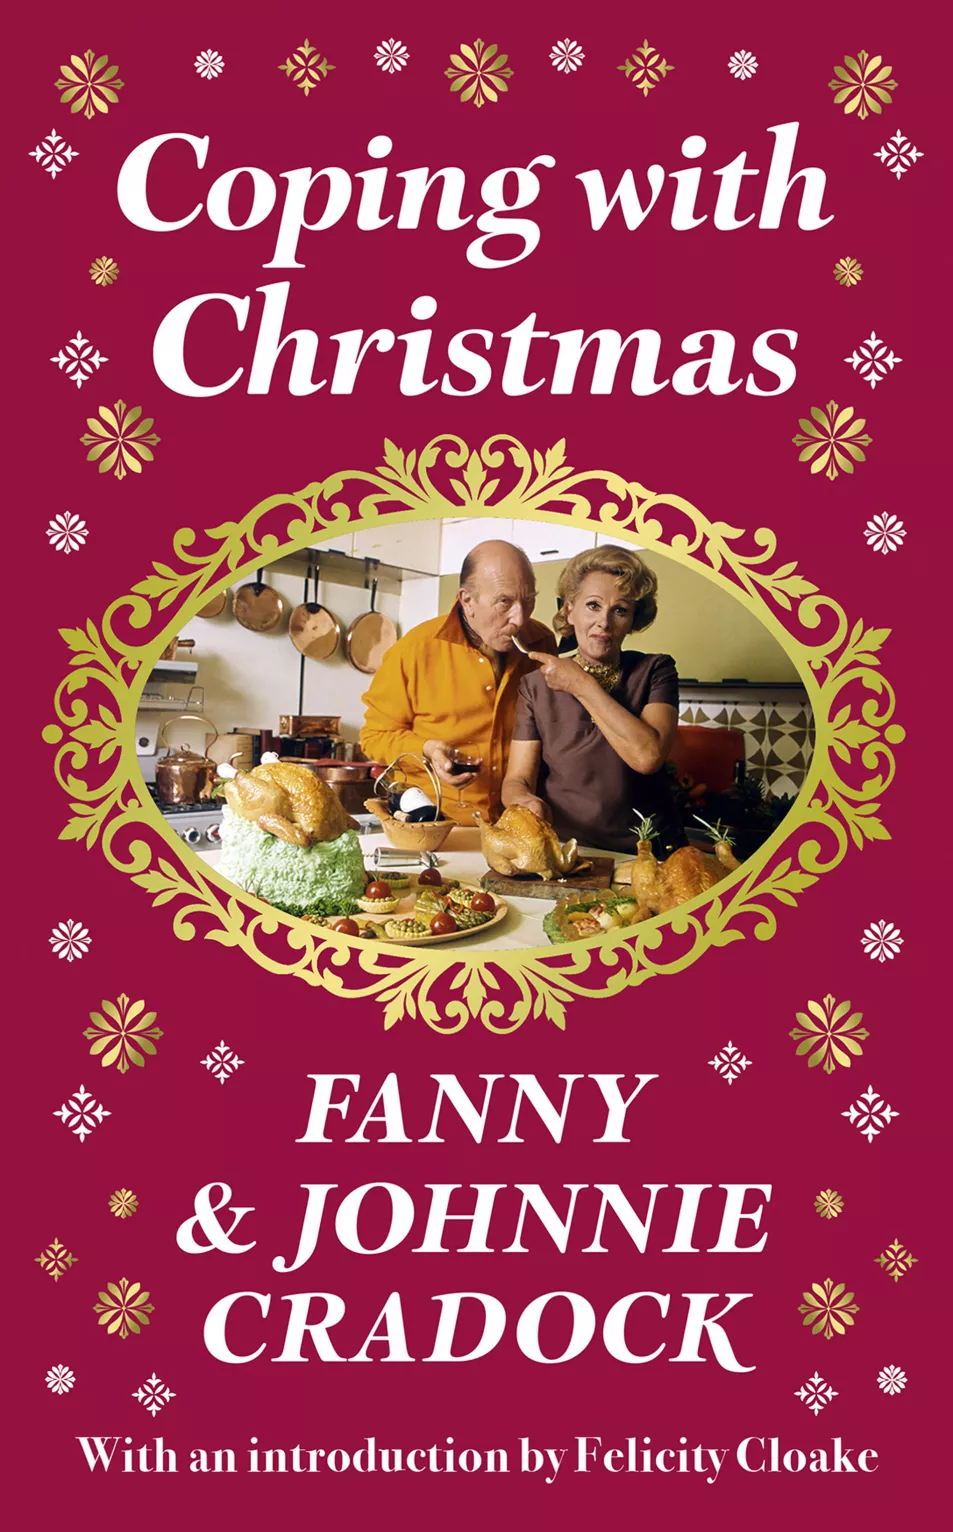 Coping With Christmas A Fabulously Festive Christmas Companion by Fanny Cradock and Johnnie Cradock